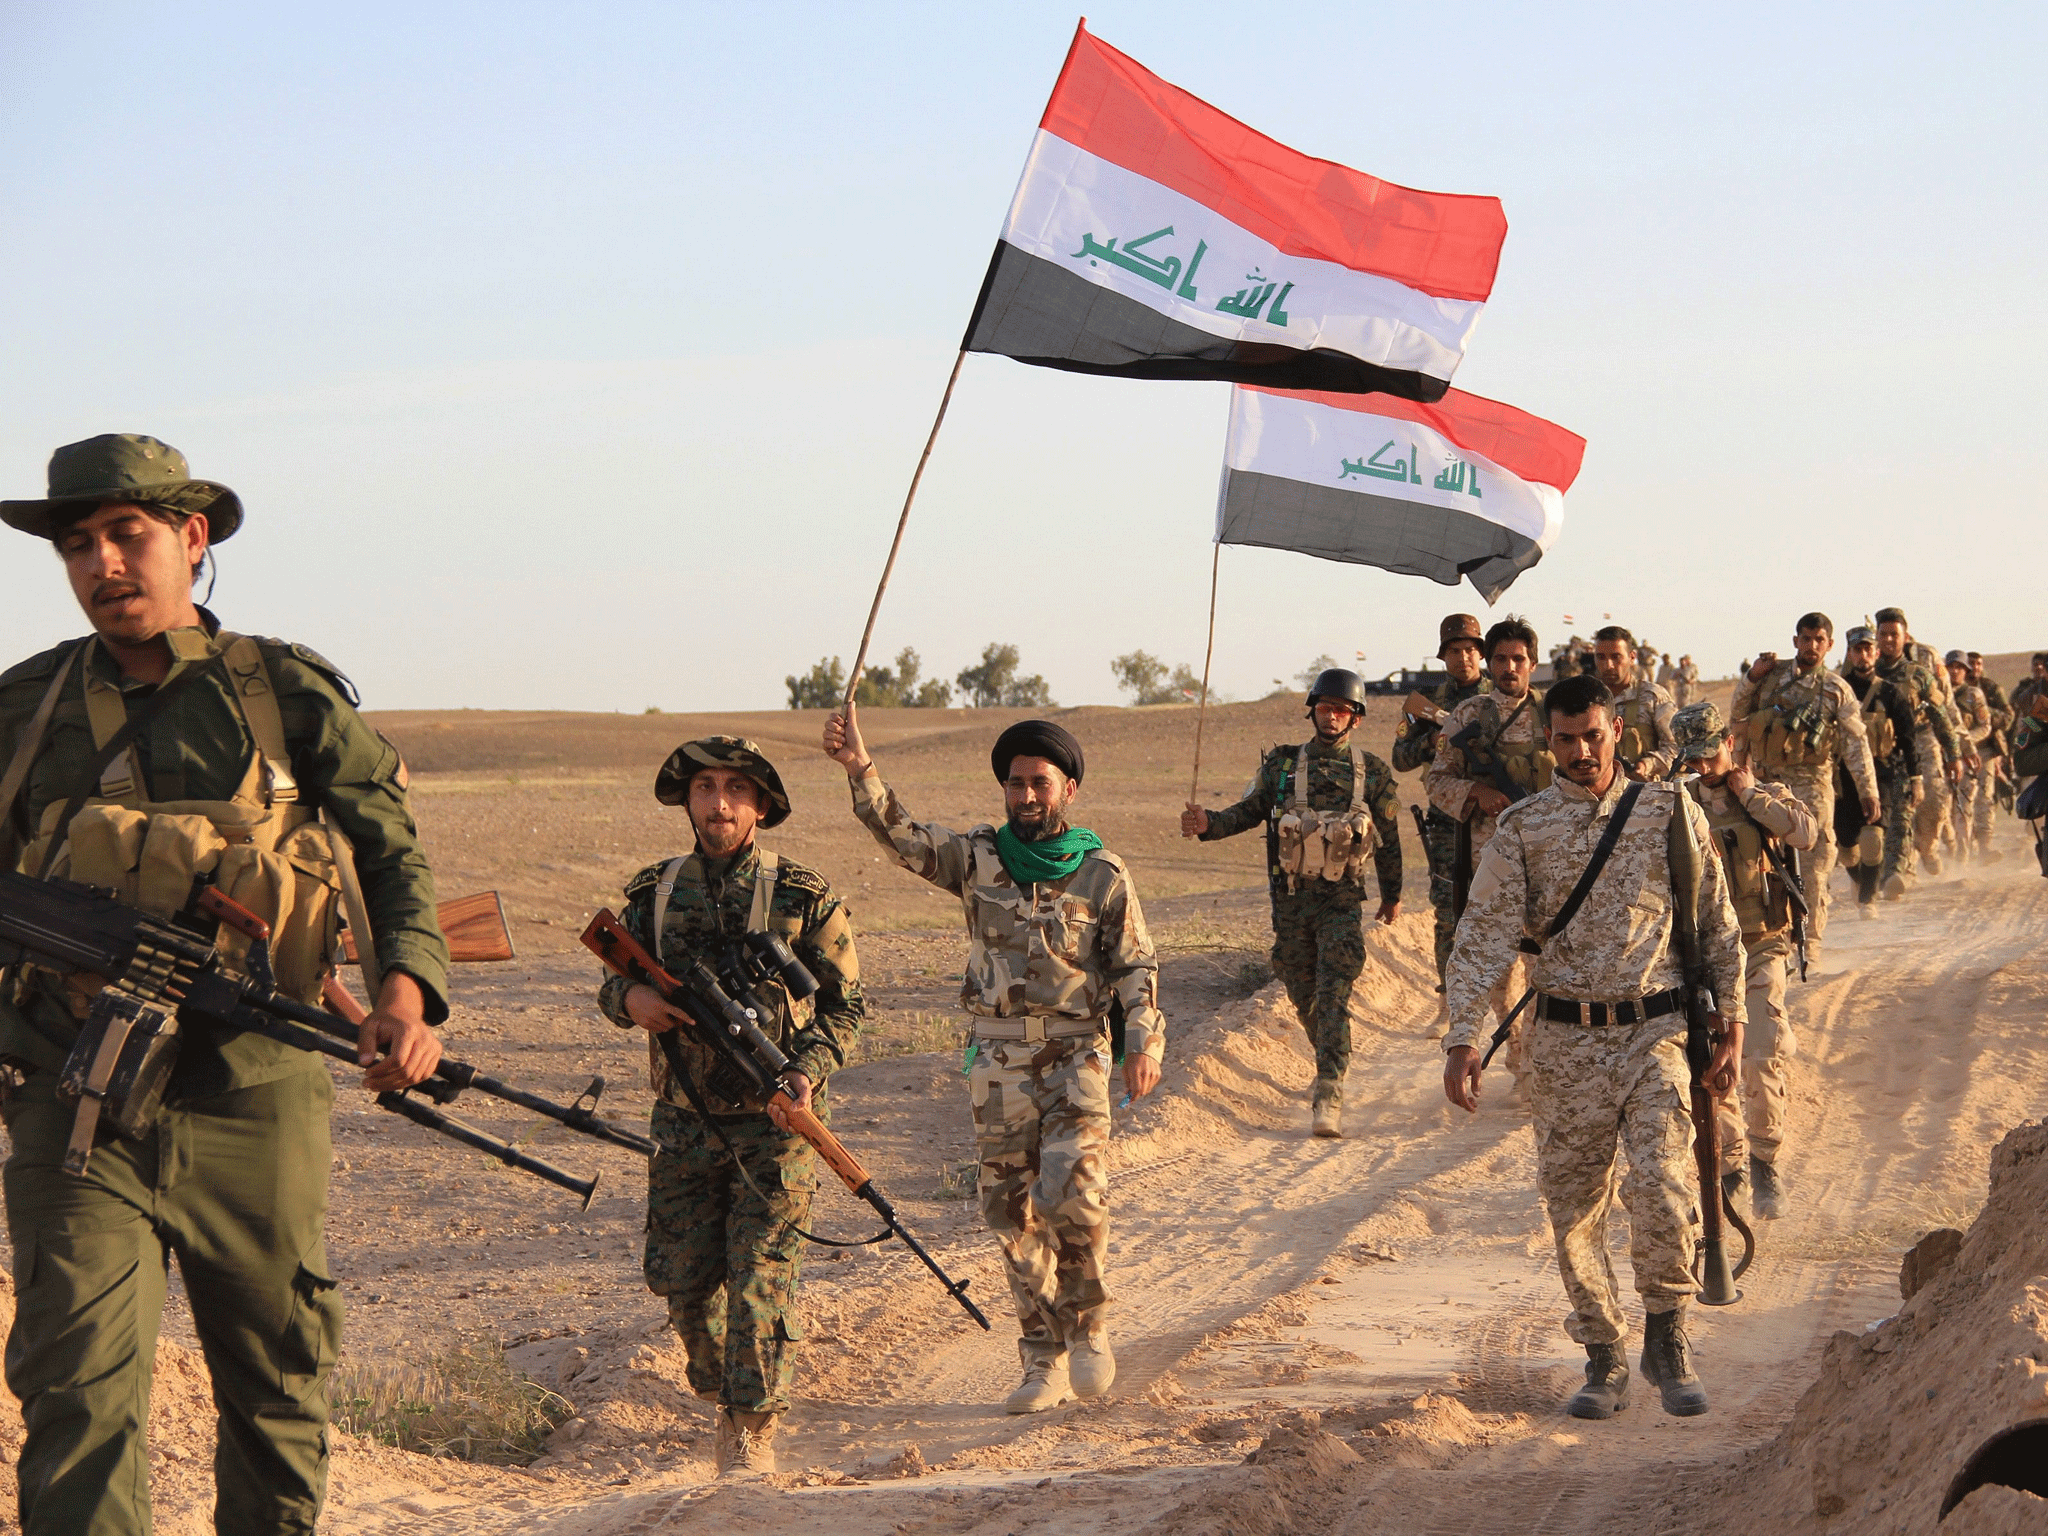 Iraqi soldiers and members of Iraqi Shia militia carry the Iraqi flag during fighting with Isis militants, in Tikrit, Iraq, 31 March 2015